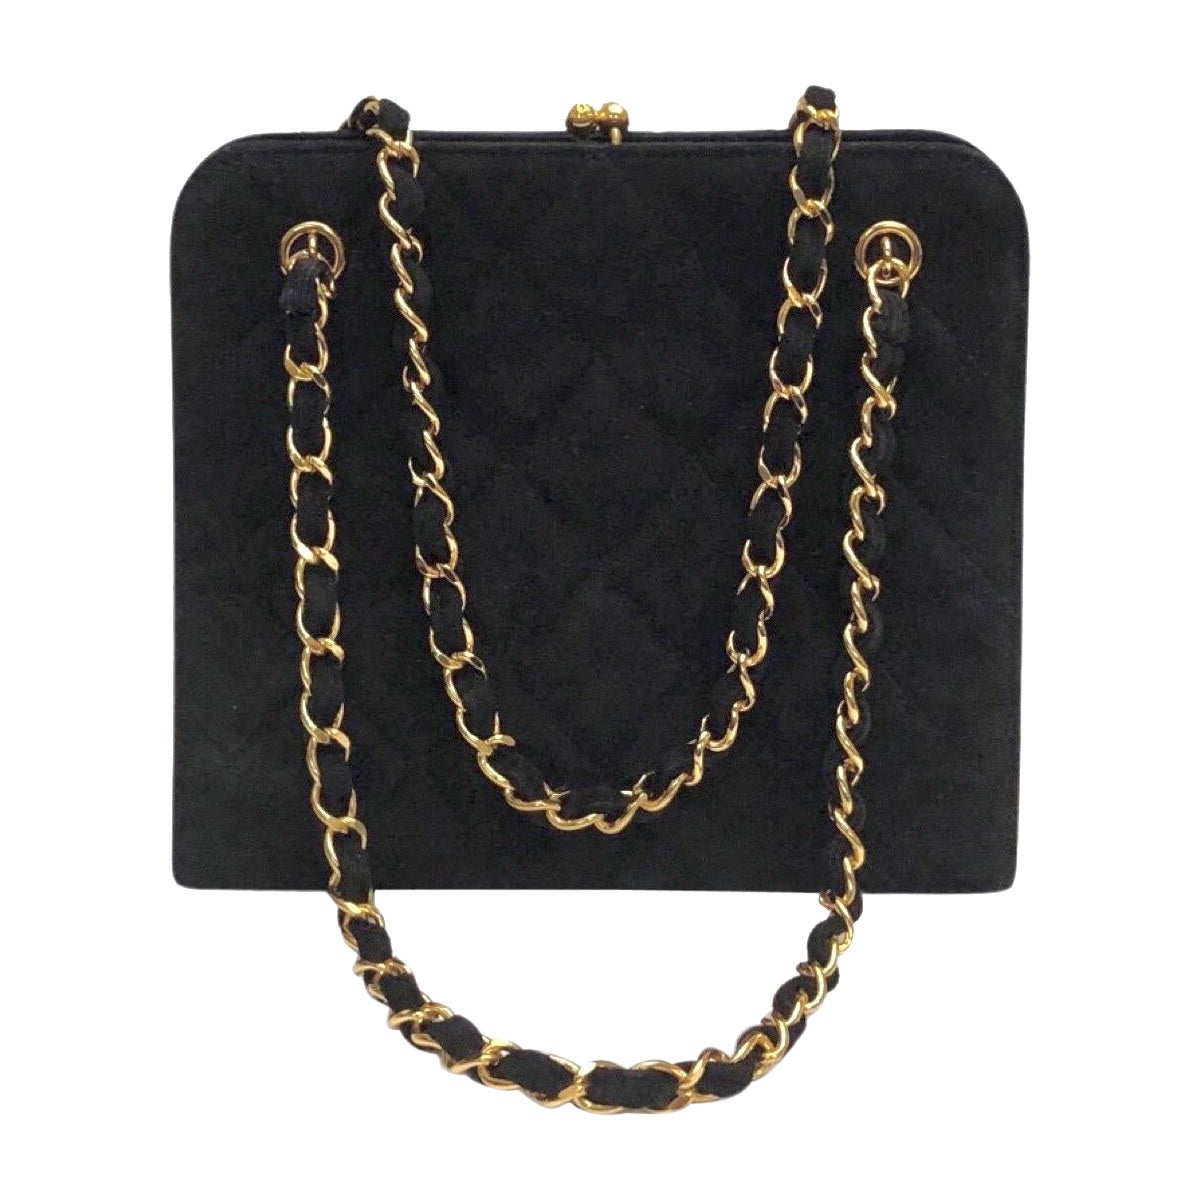 Chanel Black Suede Quilted Gold Toned Chain Box Handbag For Sale